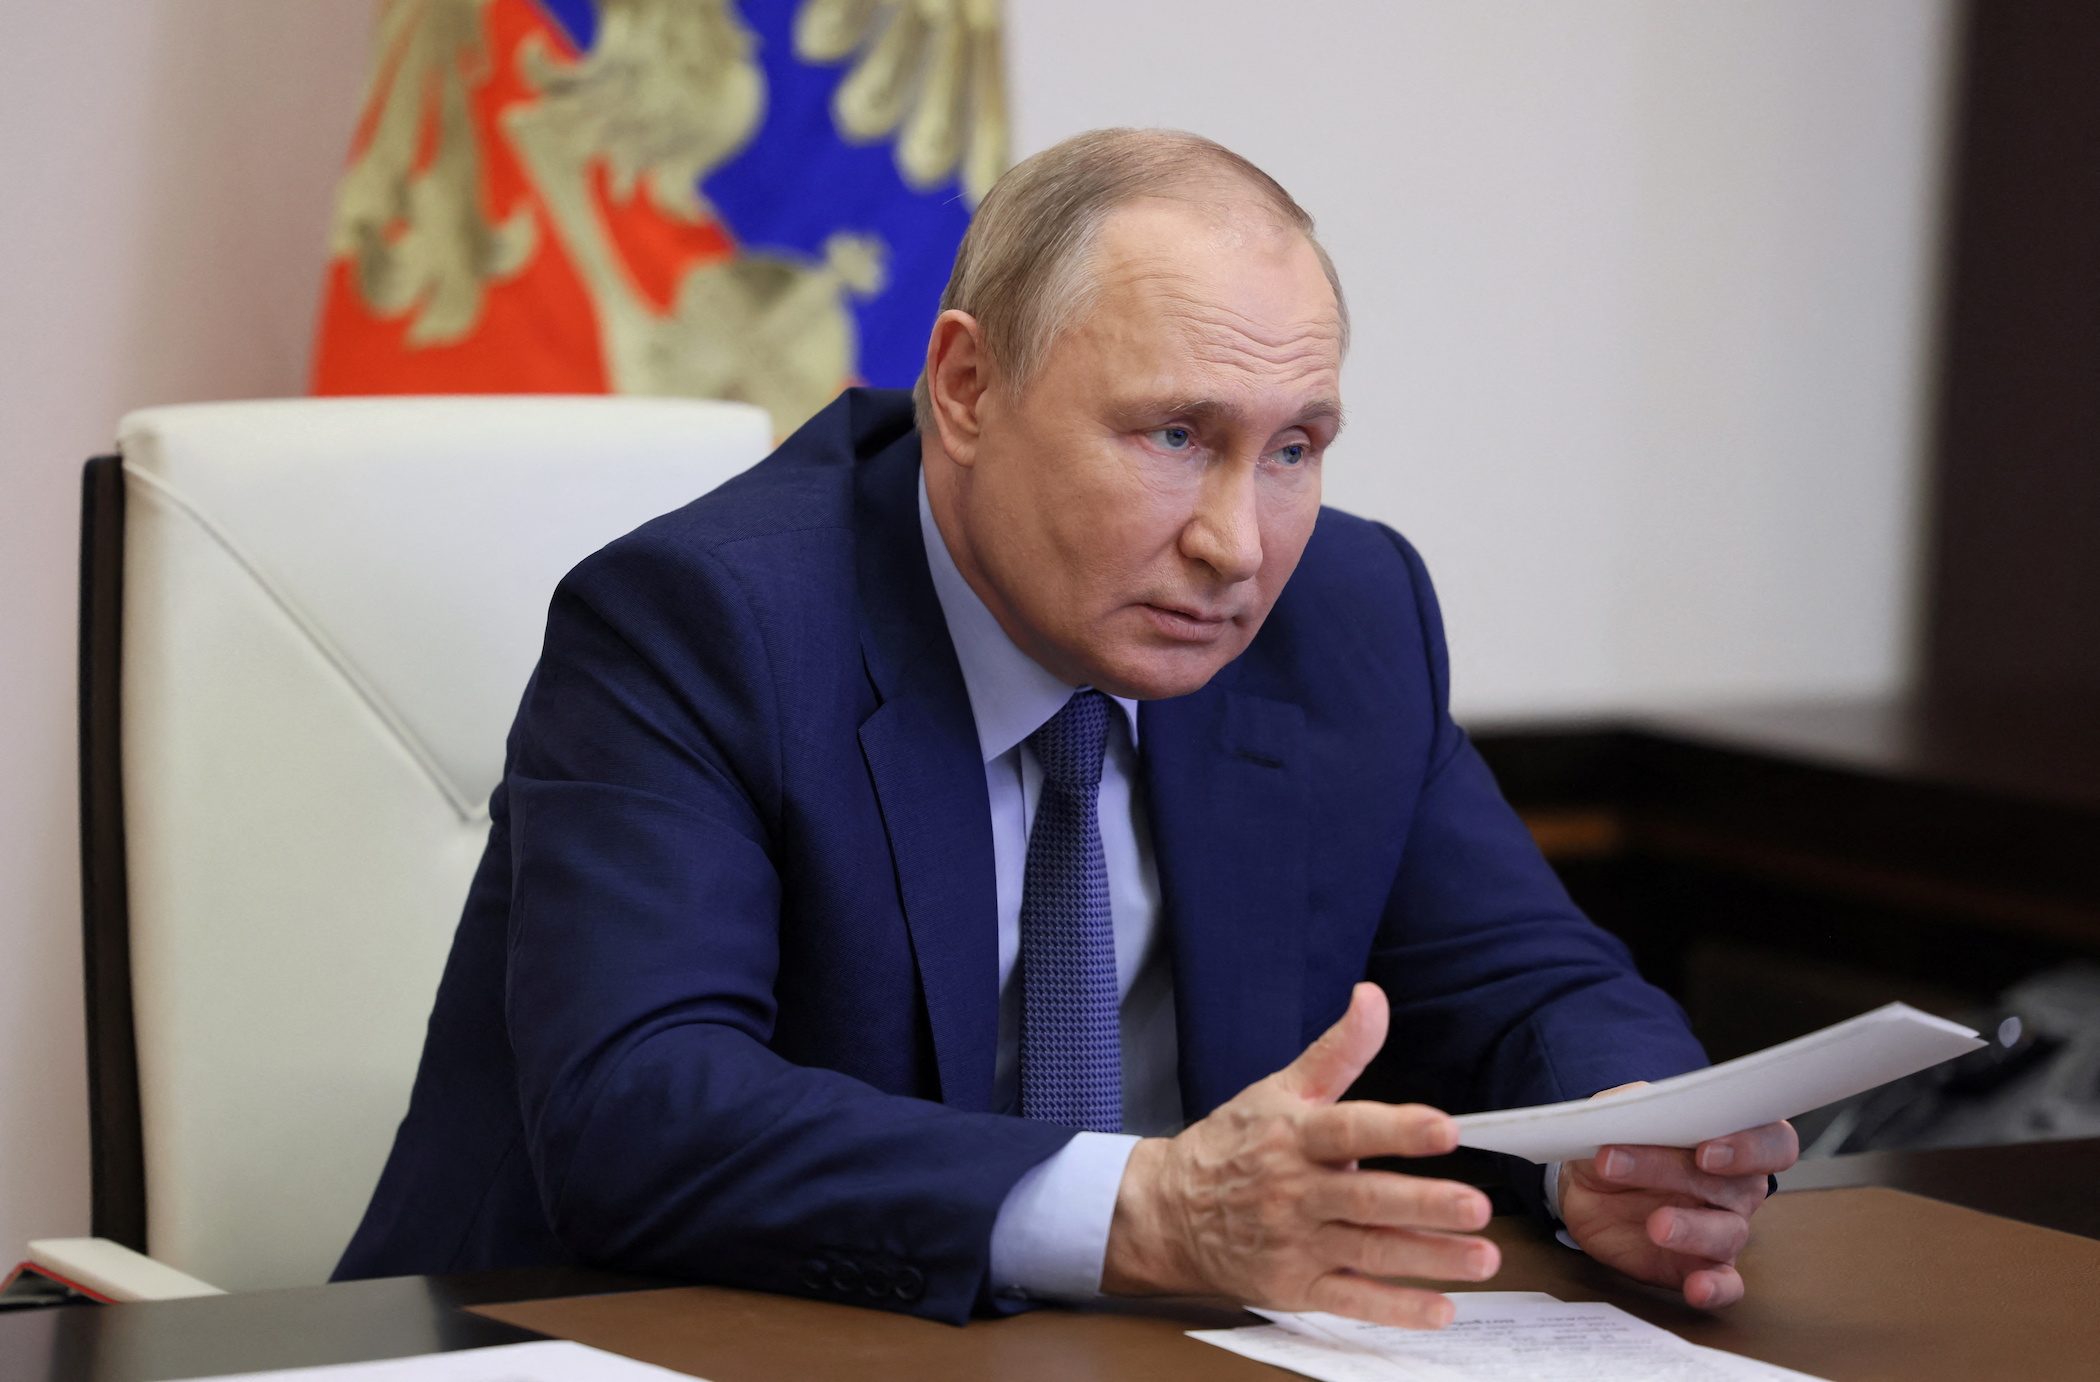 Putin orders new budget rules to boost Russia’s growth